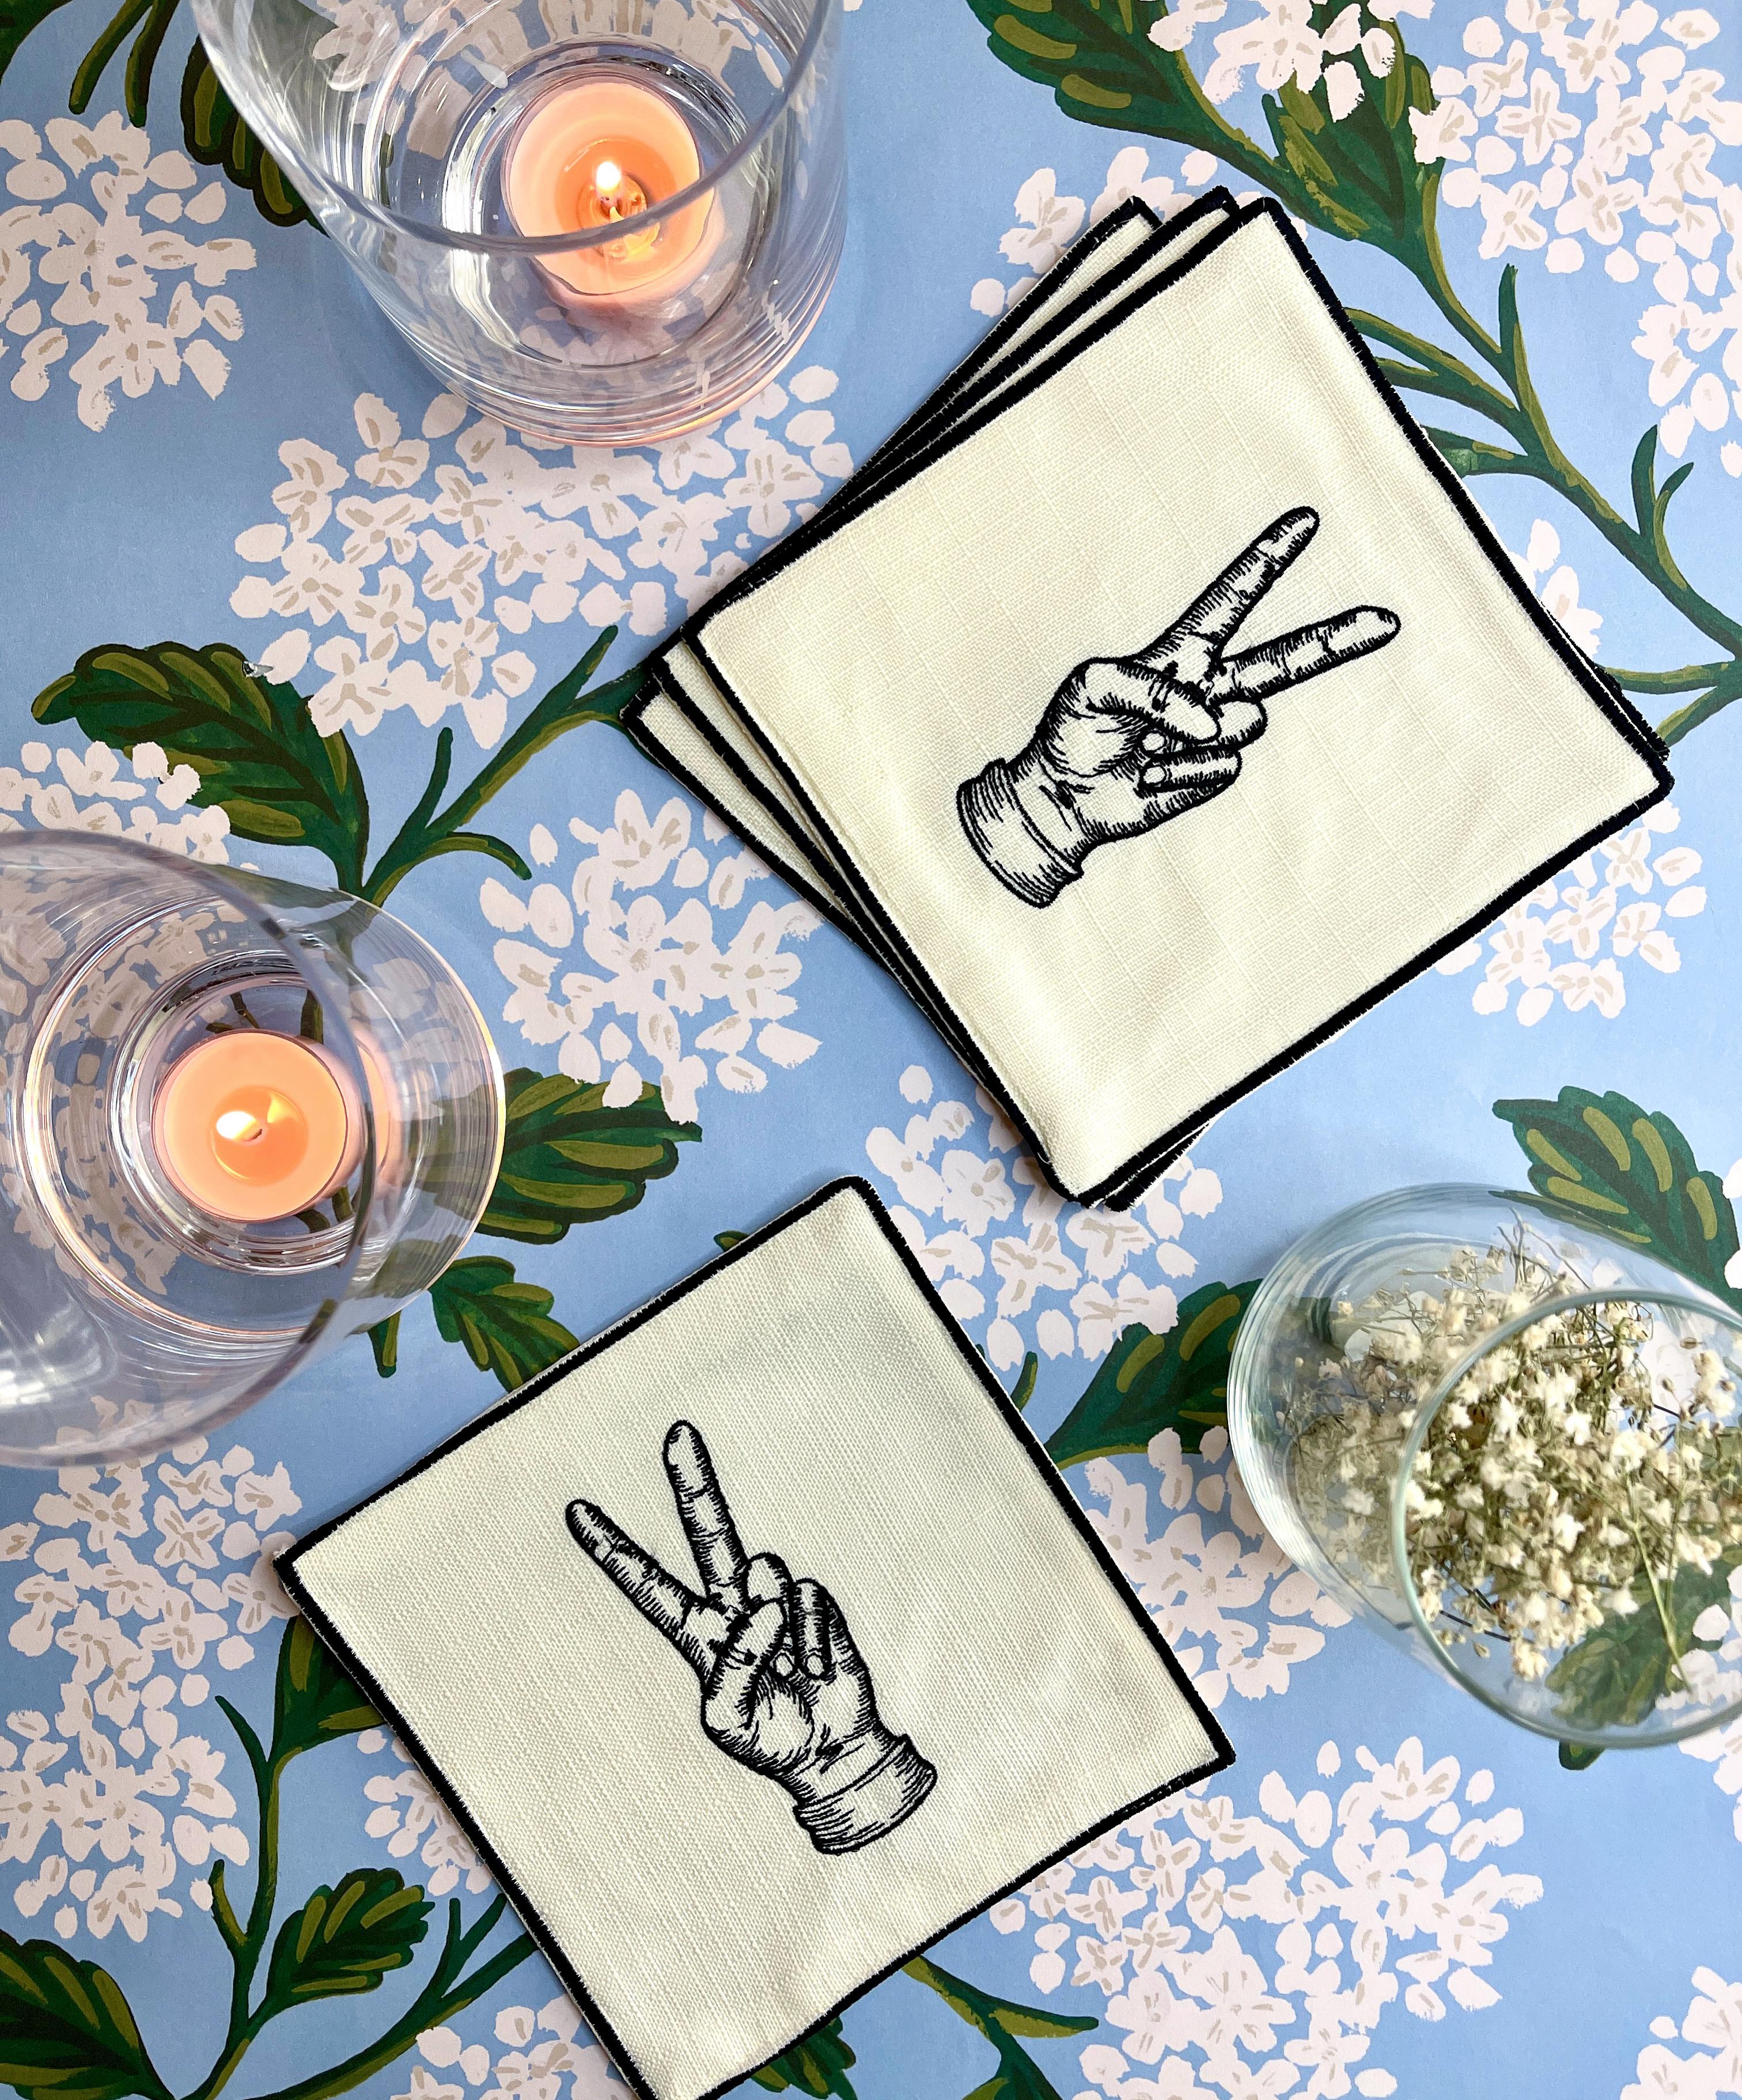 Our iconic peace sign is embroidered on a 6